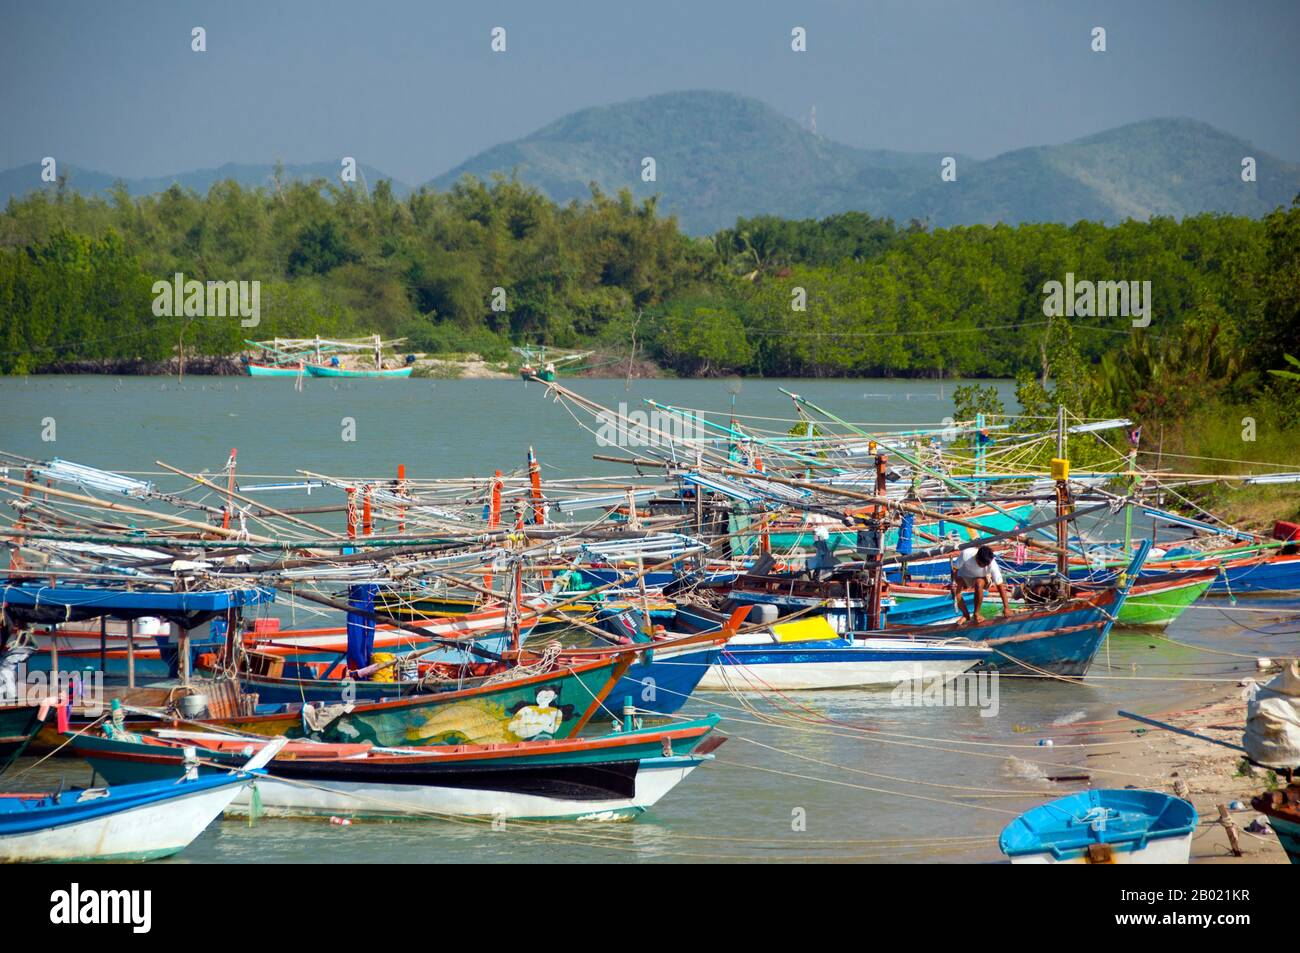 Bang Nang Rom Bay is located between Prachuap Khiri Khan and its satellite beach at Ao Noi. This prosperous Thai fishing village has a reputation for making excellent wooden fishing vessels by hand. Once finished, the boats are either sold to neighbouring fishing communities, or used by local fishermen to catch a prized local fish called ching chang, which is dried and then sold to South Asian buyers. Stock Photo